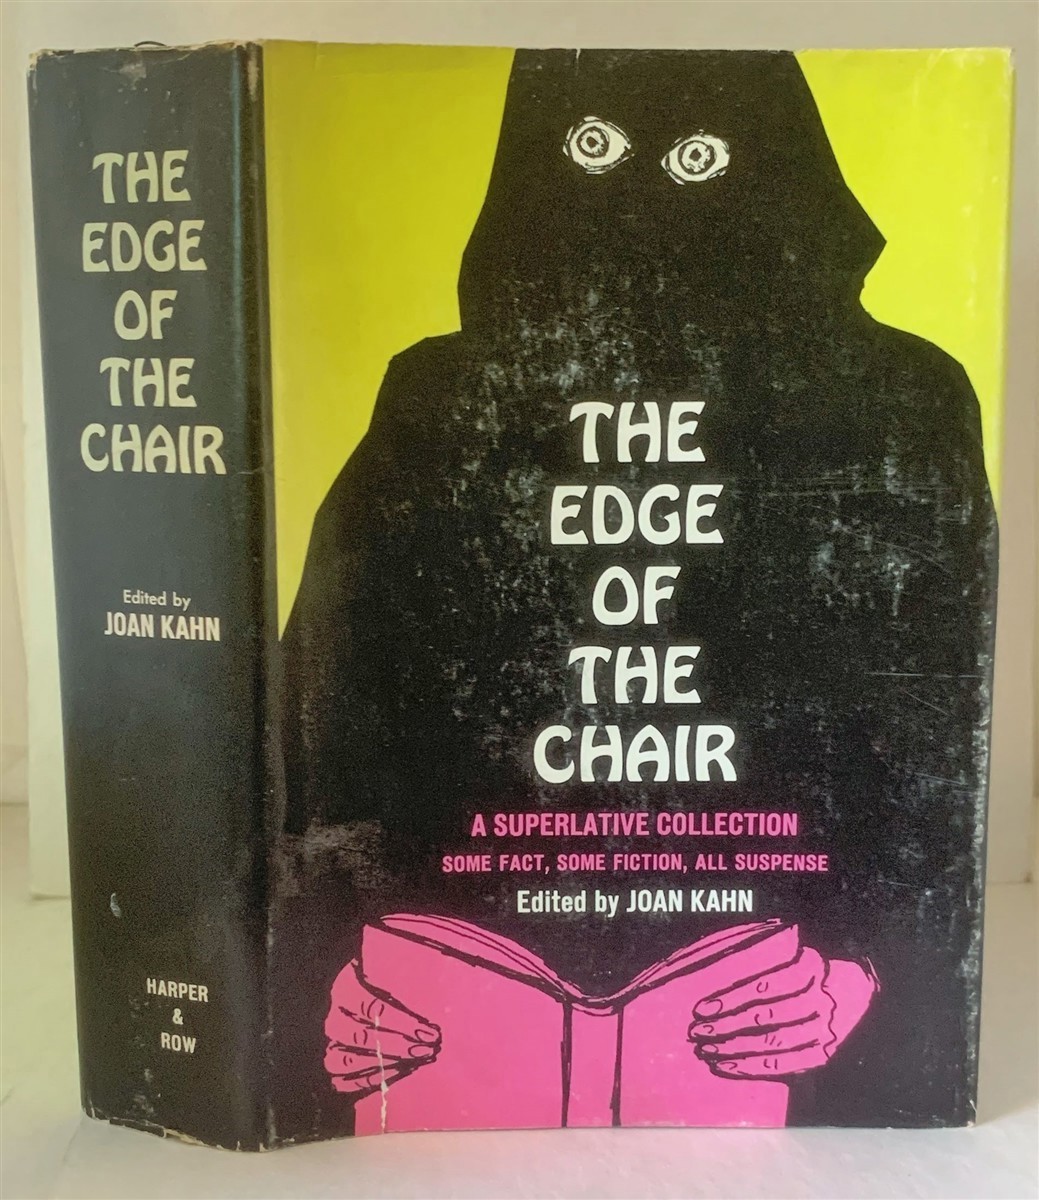 KAHN, JOAN (EDITOR) - The Edge of the Chair a Superlative Collection - Some Fact, Some Fiction, All Suspense